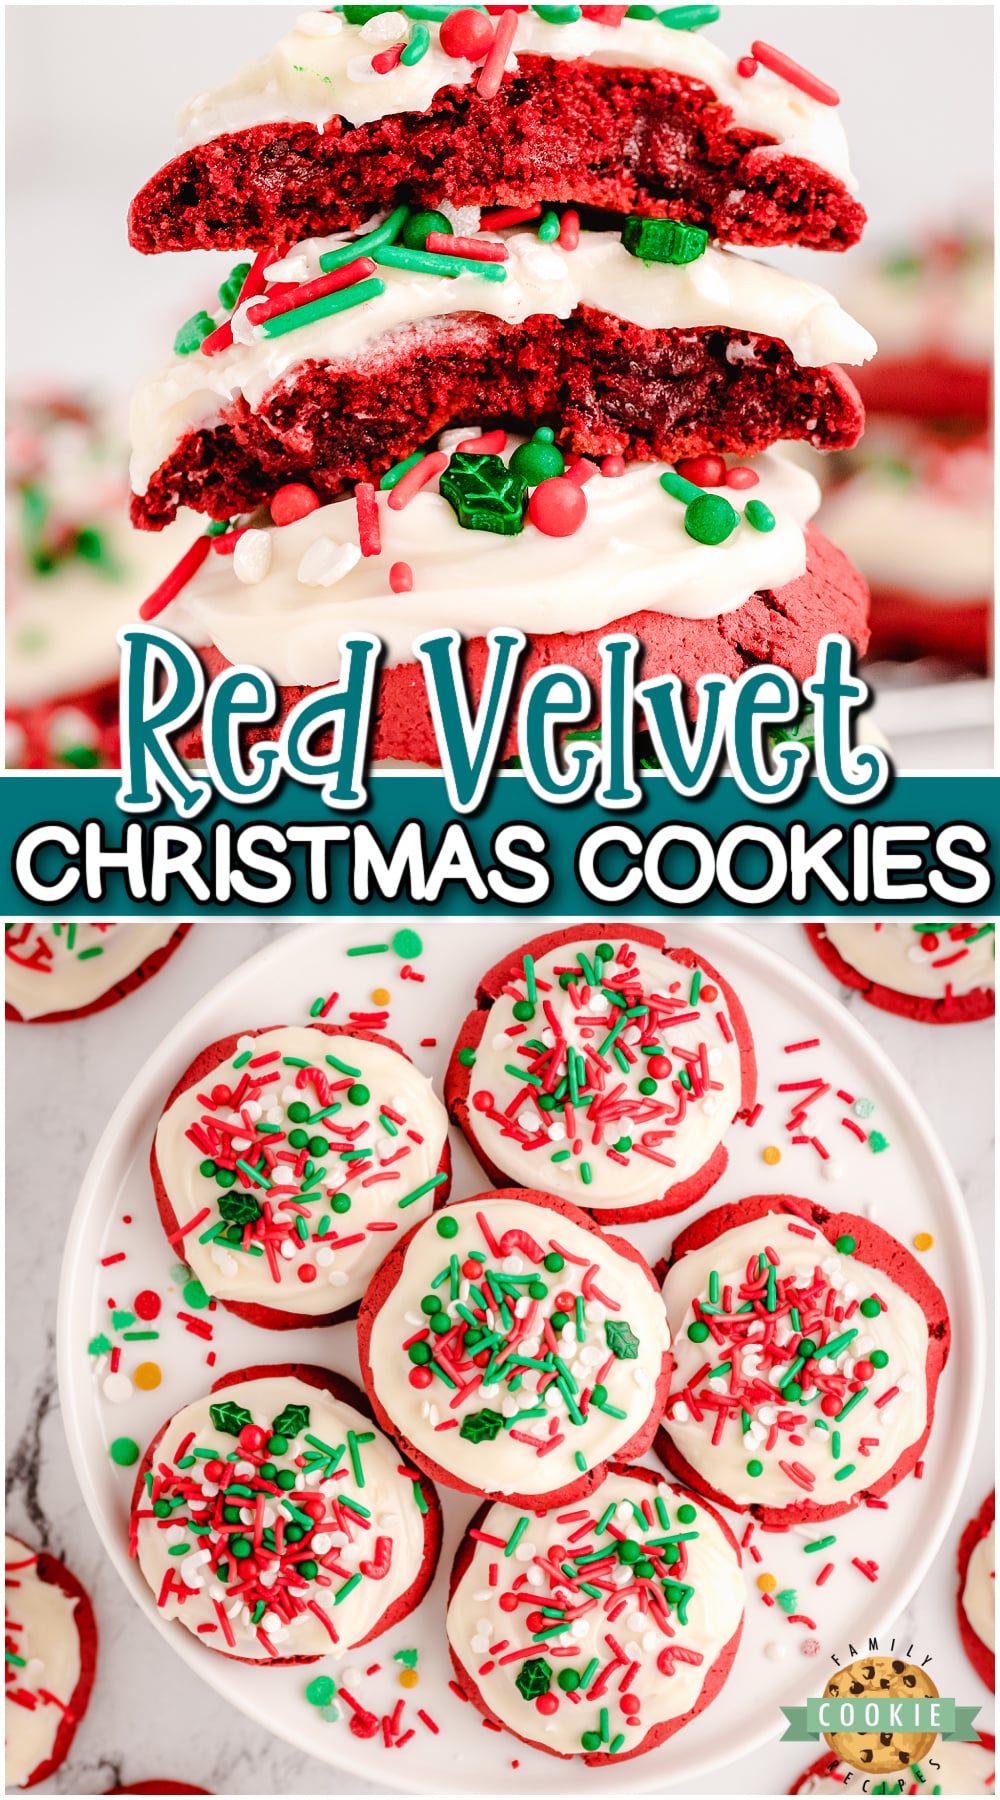 Red Velvet Christmas cookies with the festive red color, rich chocolate taste & cream cheese icing on top, these cookies are sure to be holiday favorites!